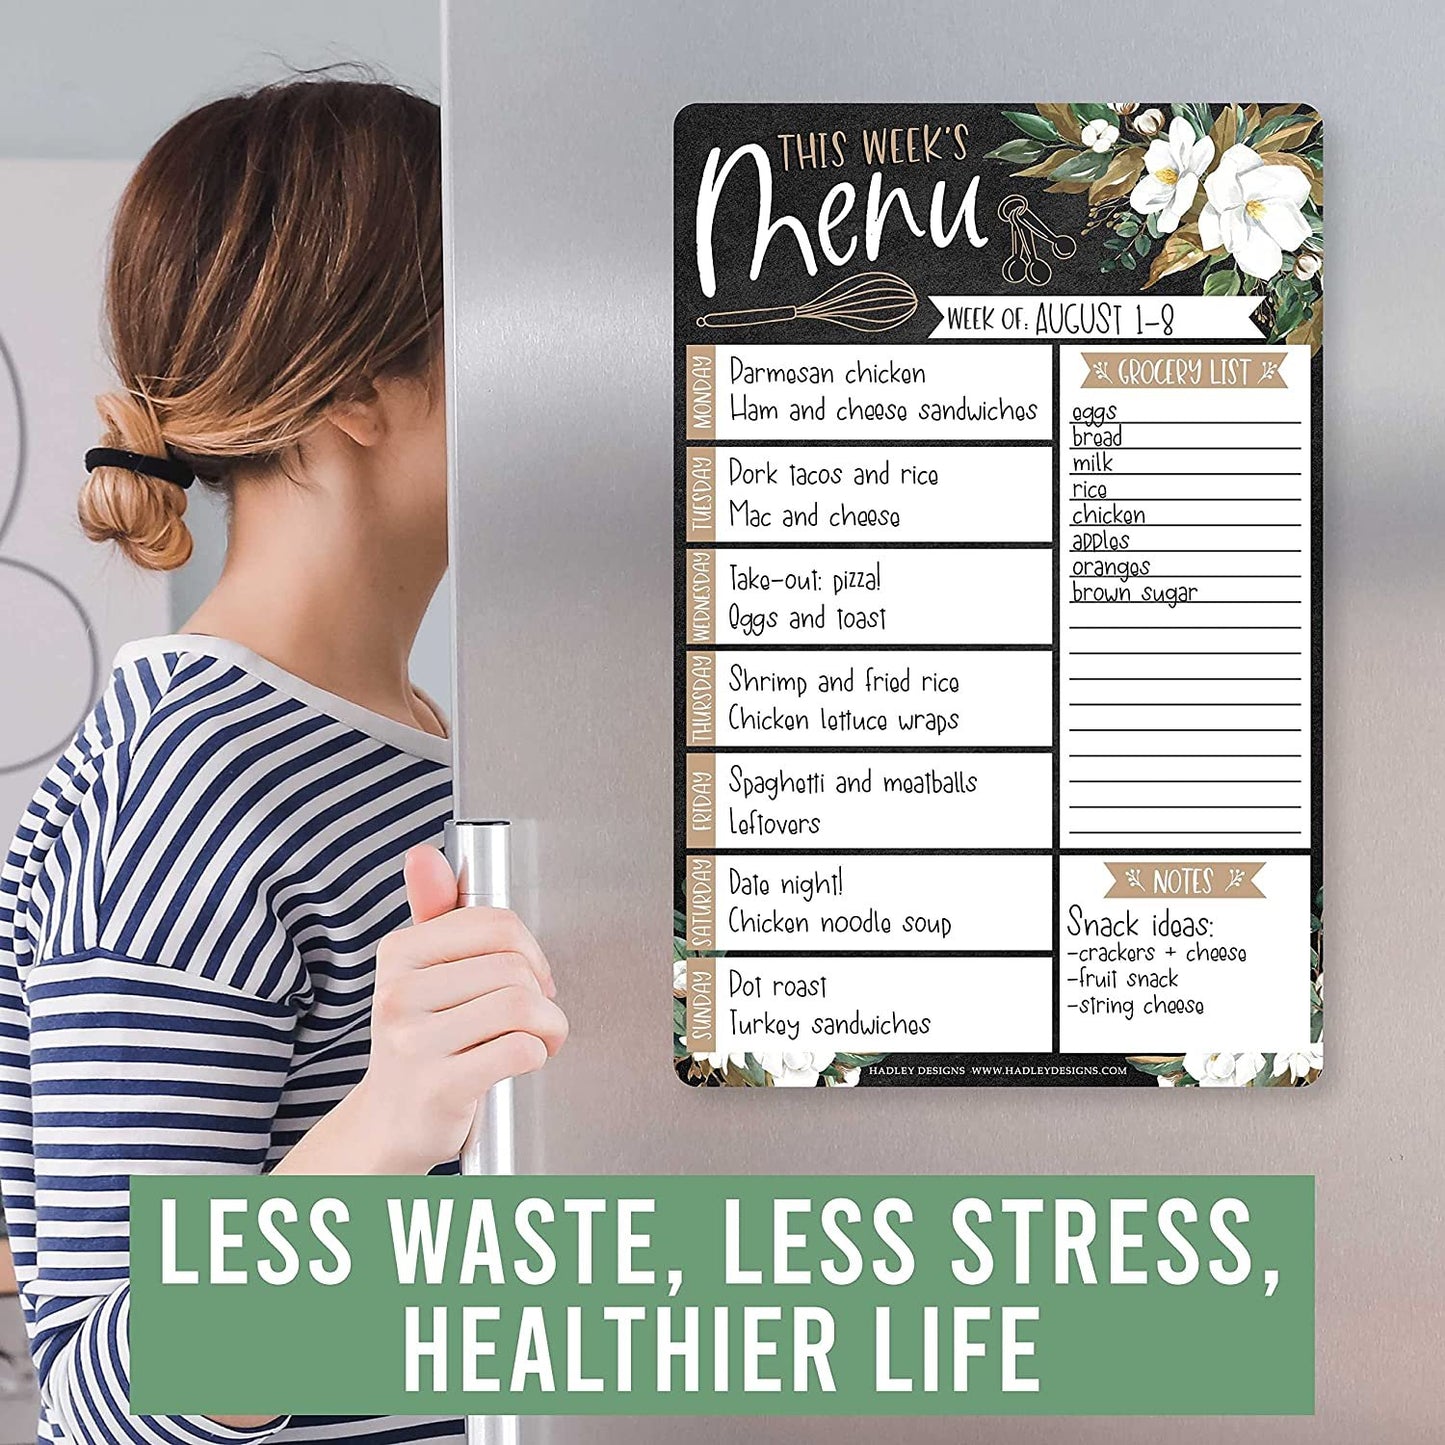 Weekly Meal Planner Dry Erase Board for Refrigerator - Magnolia Magnetic Weekly Menu Board for Kitchen Conversion Chart Magnet, Magnetic Meal Planner for Refrigerator, Magnetic Menu Board for Fridge